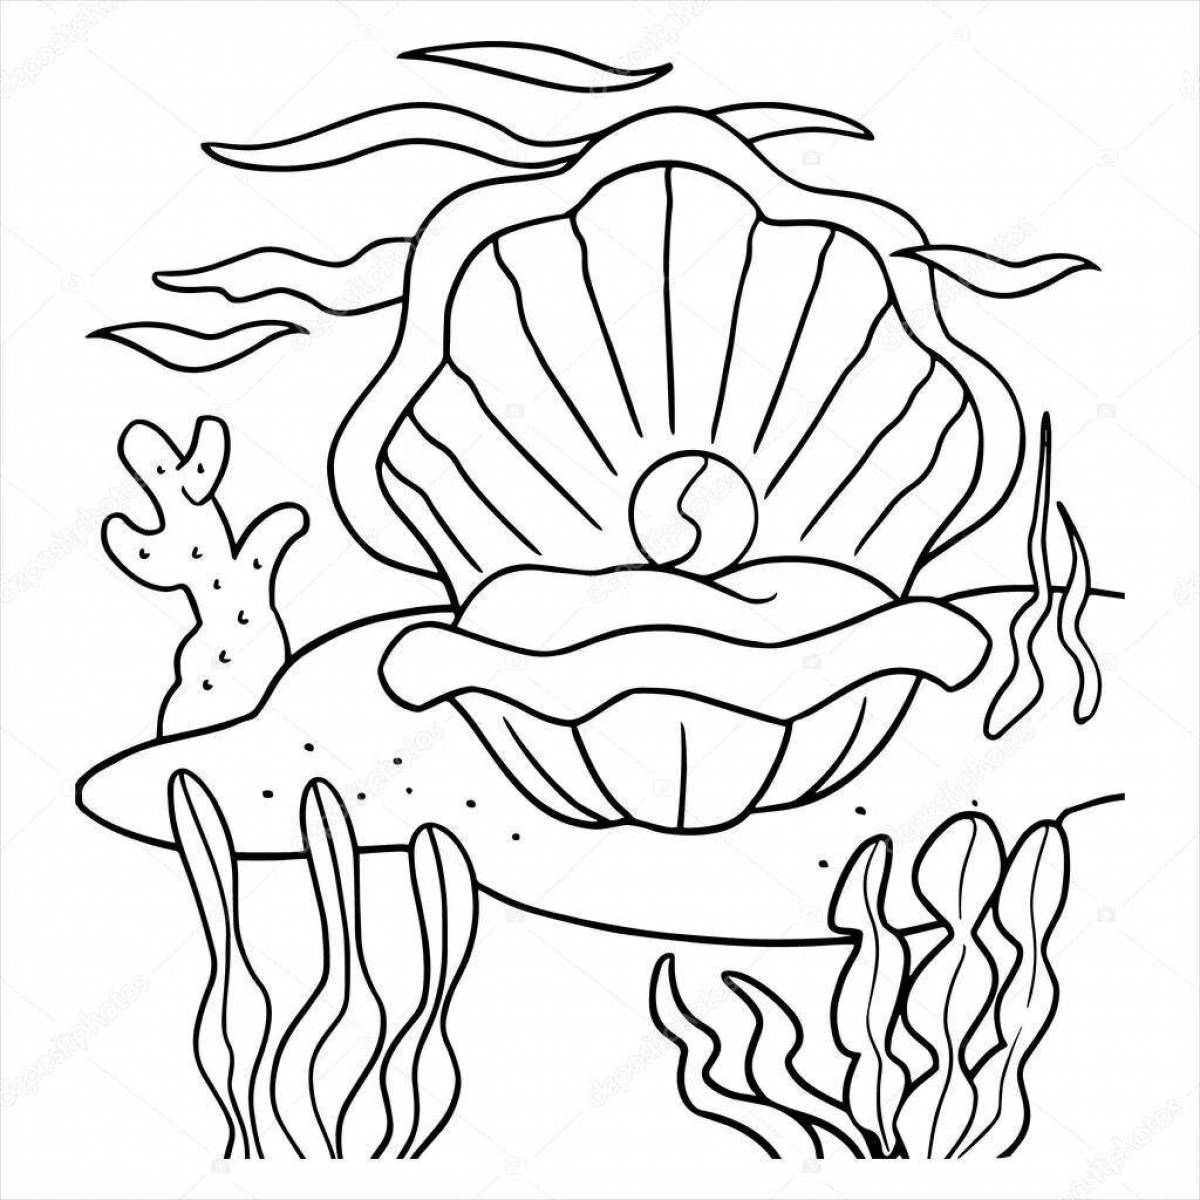 Exquisite pearl coloring page